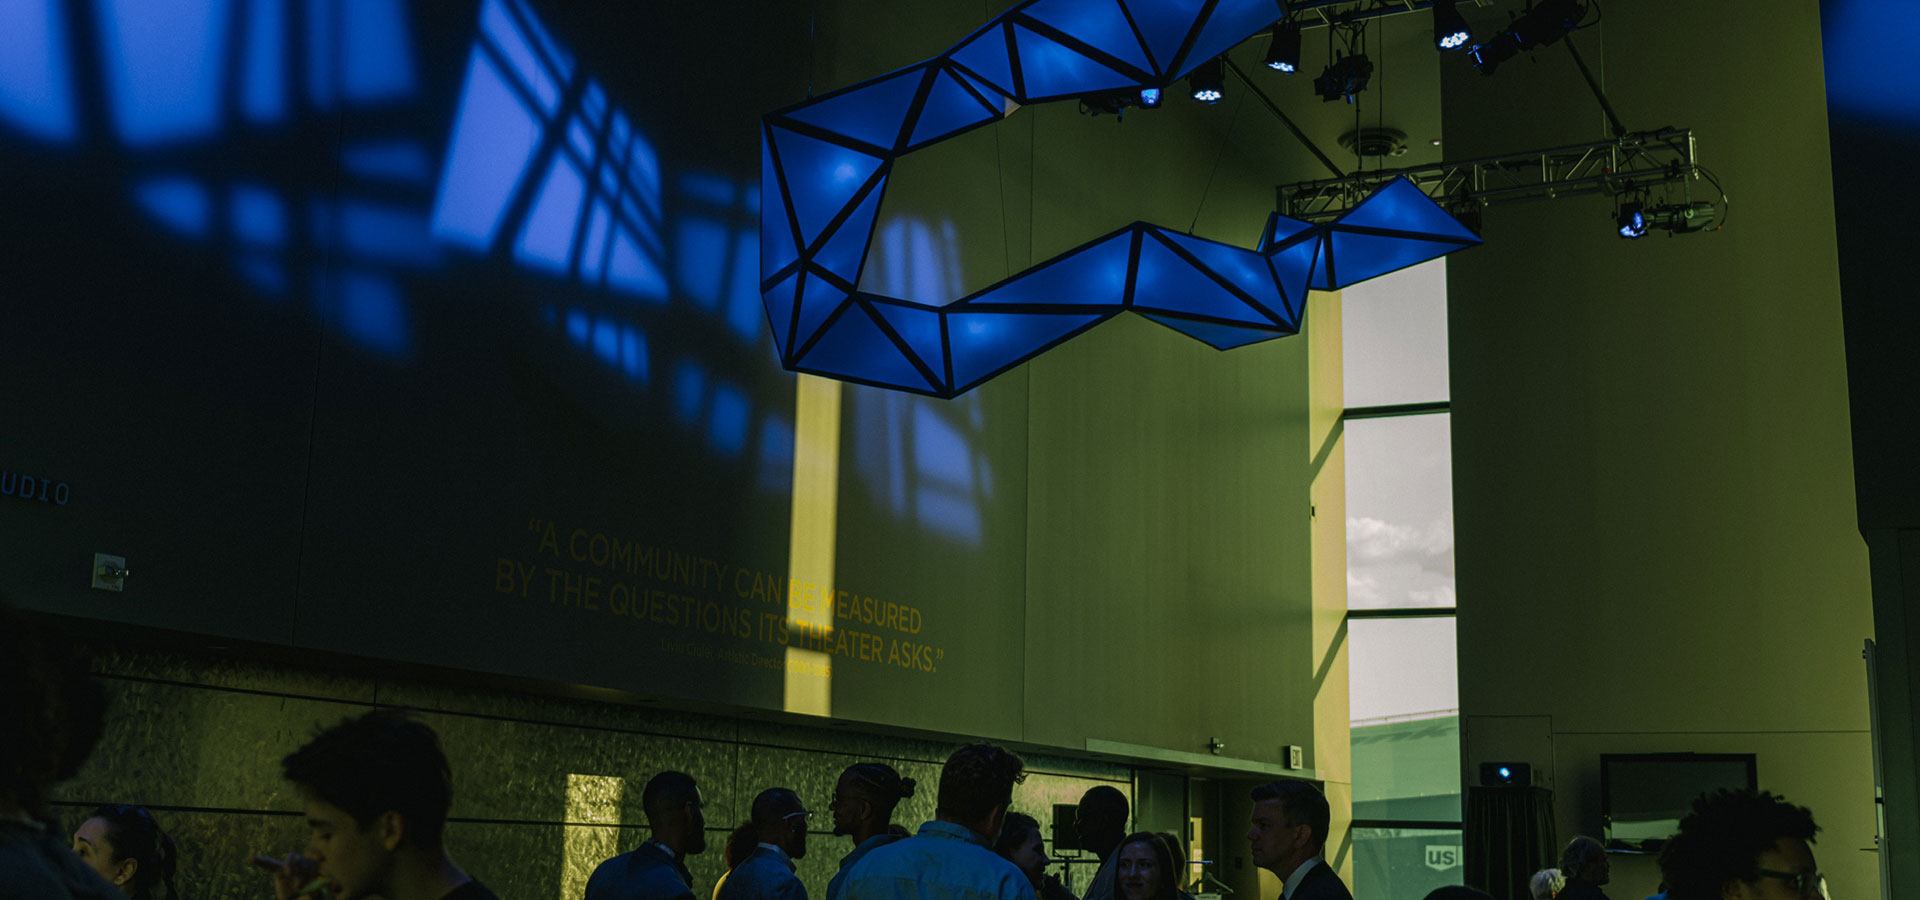 Several people milling about underneath a light-based sculpture installation